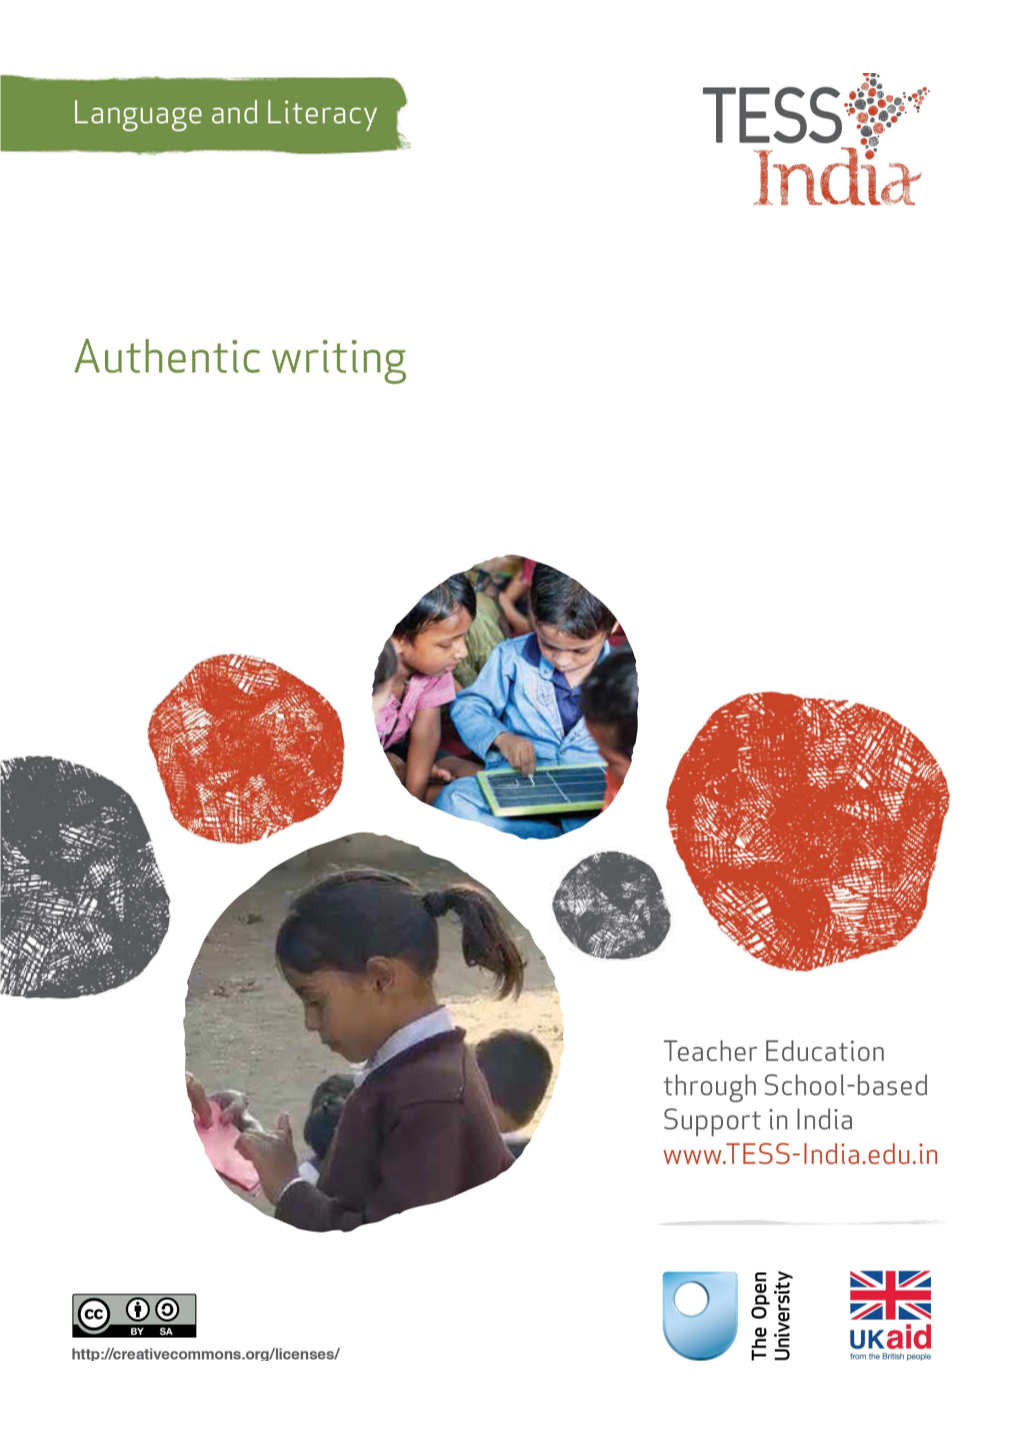 TESS-India (Teacher Education Through School-Based Support) Aims to Improve the Classroom s2